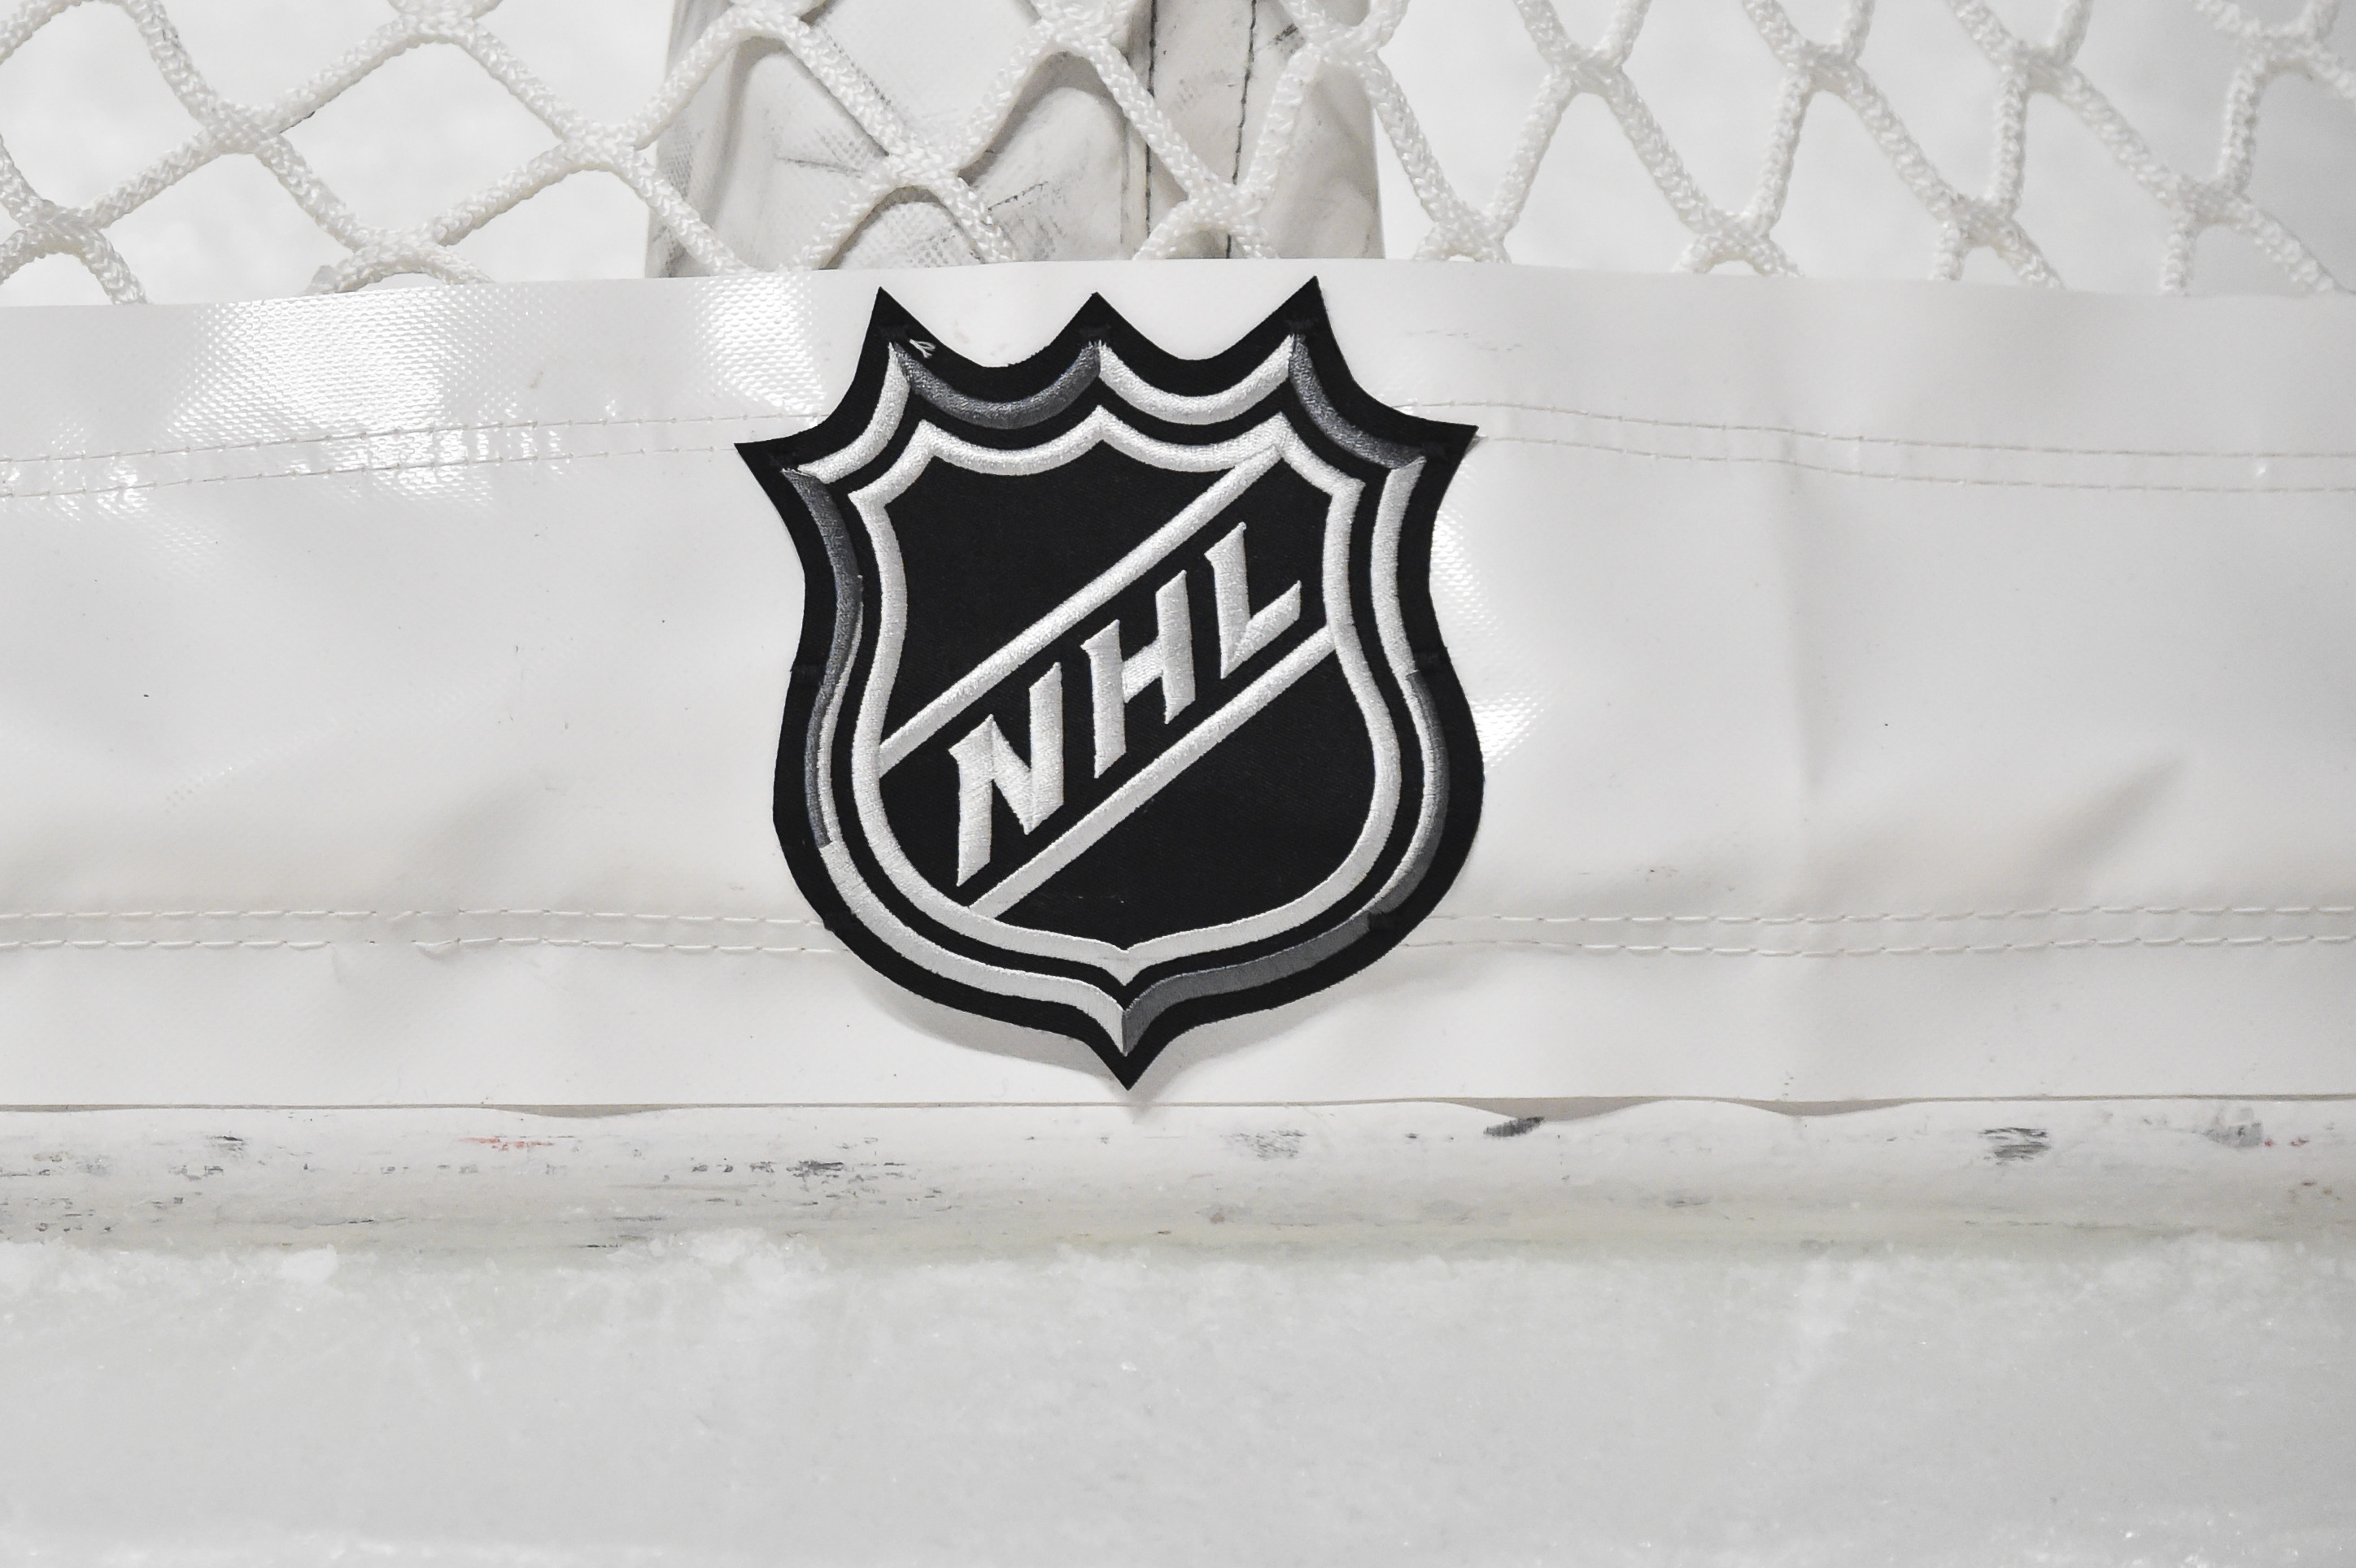 NHL, NHLPA Agree to Suspend All Operations for Dec. 22-25 amid COVID-19 Spike